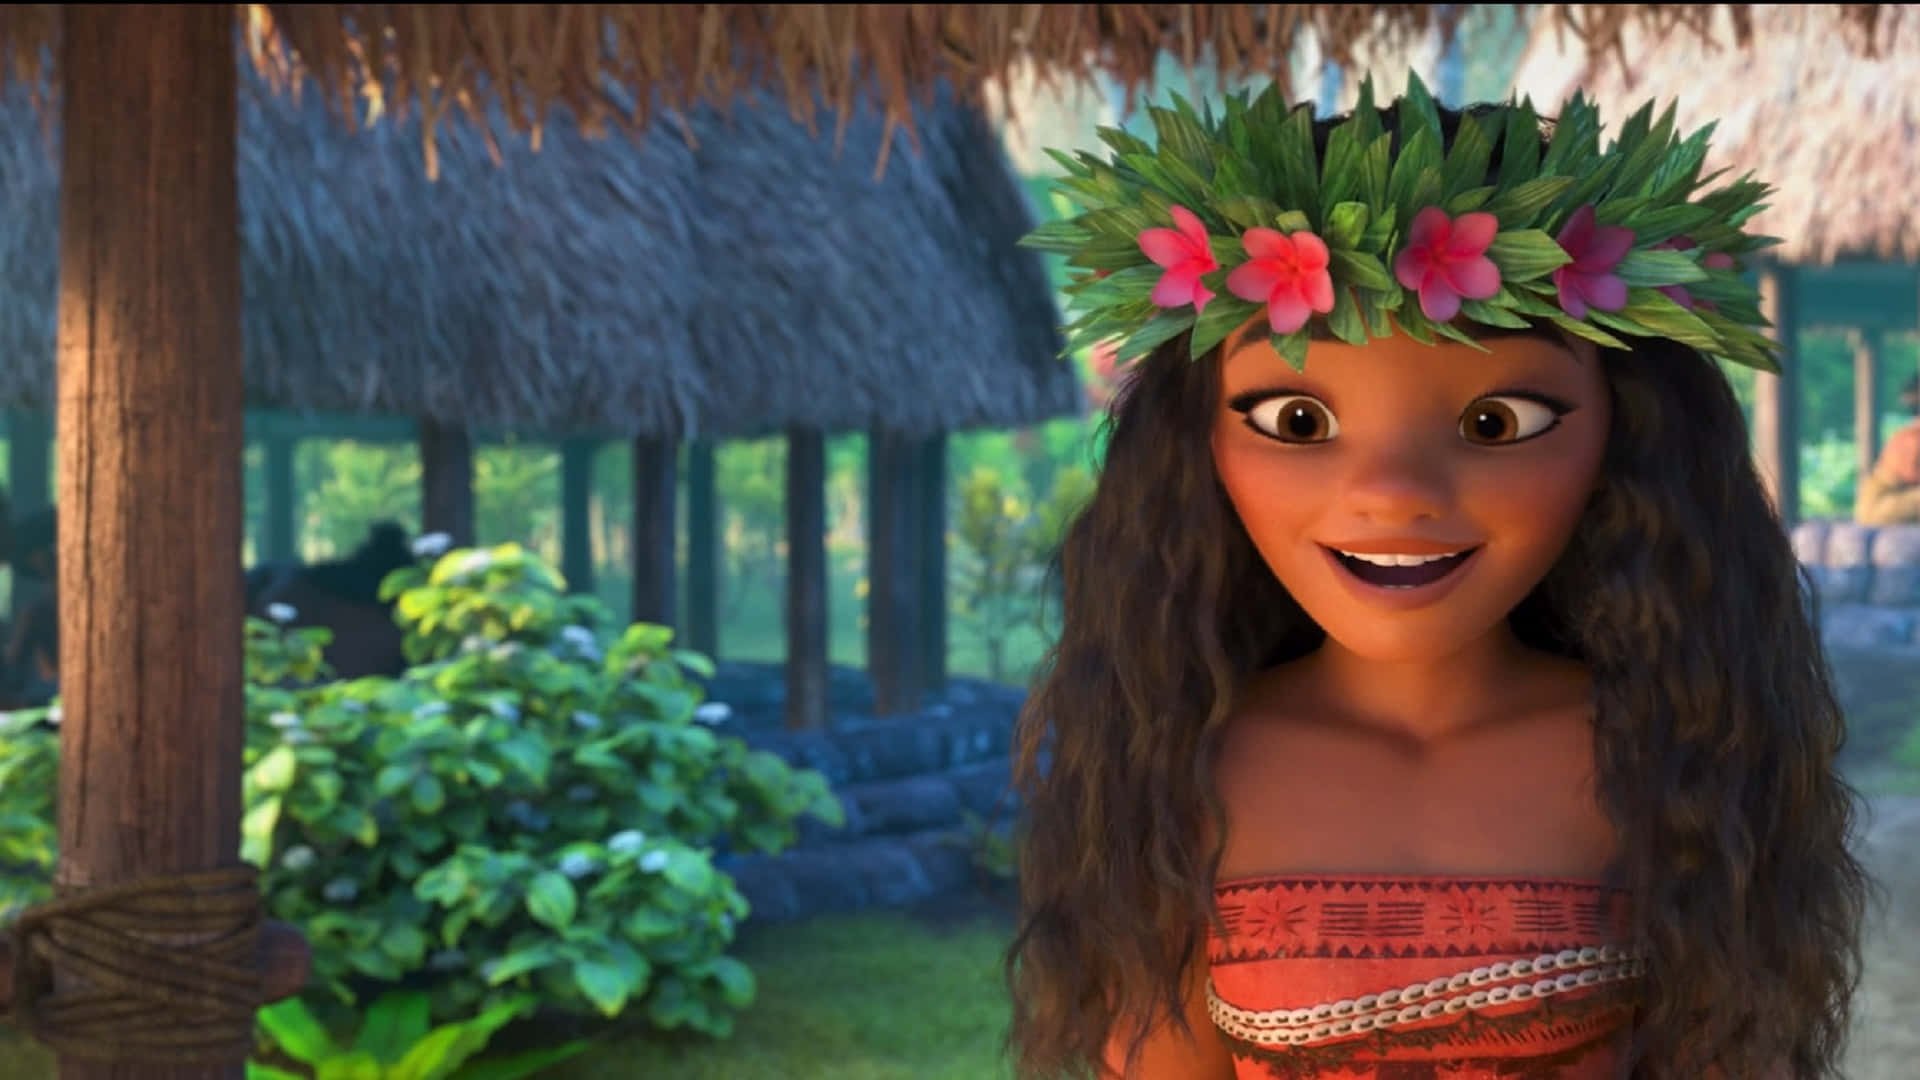 Young princess Moana takes a courageous journey